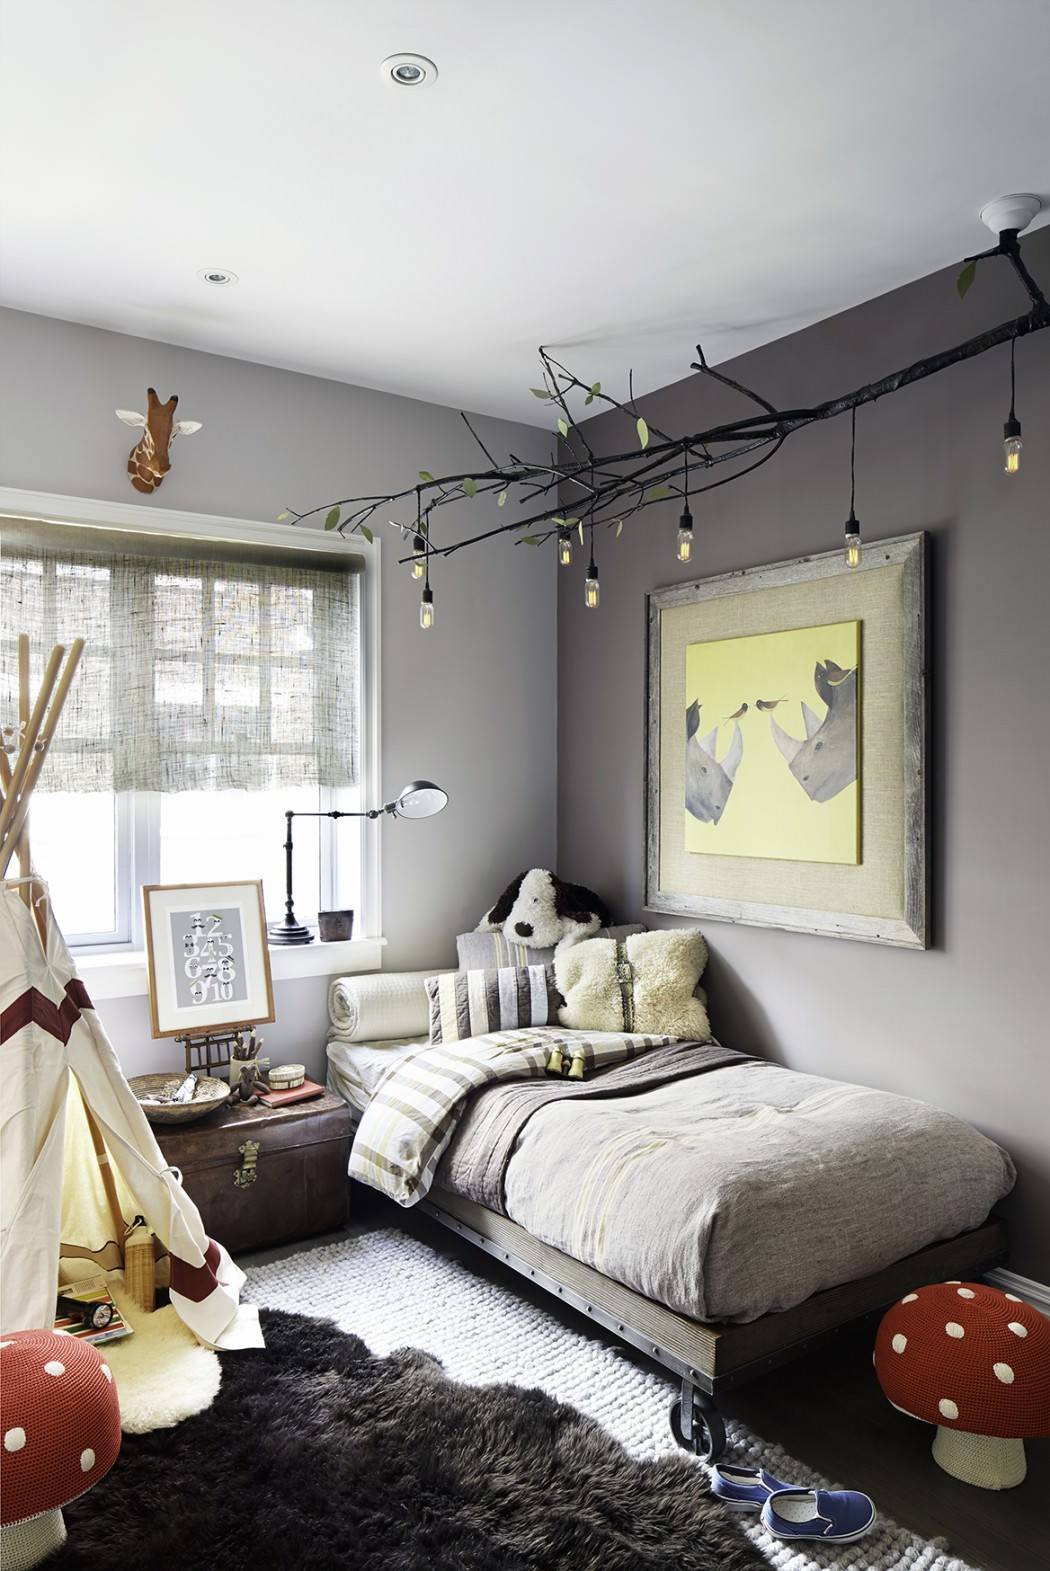 Grey Bedroom Paint
 15 Youthful Bedroom Color Schemes What Works and Why